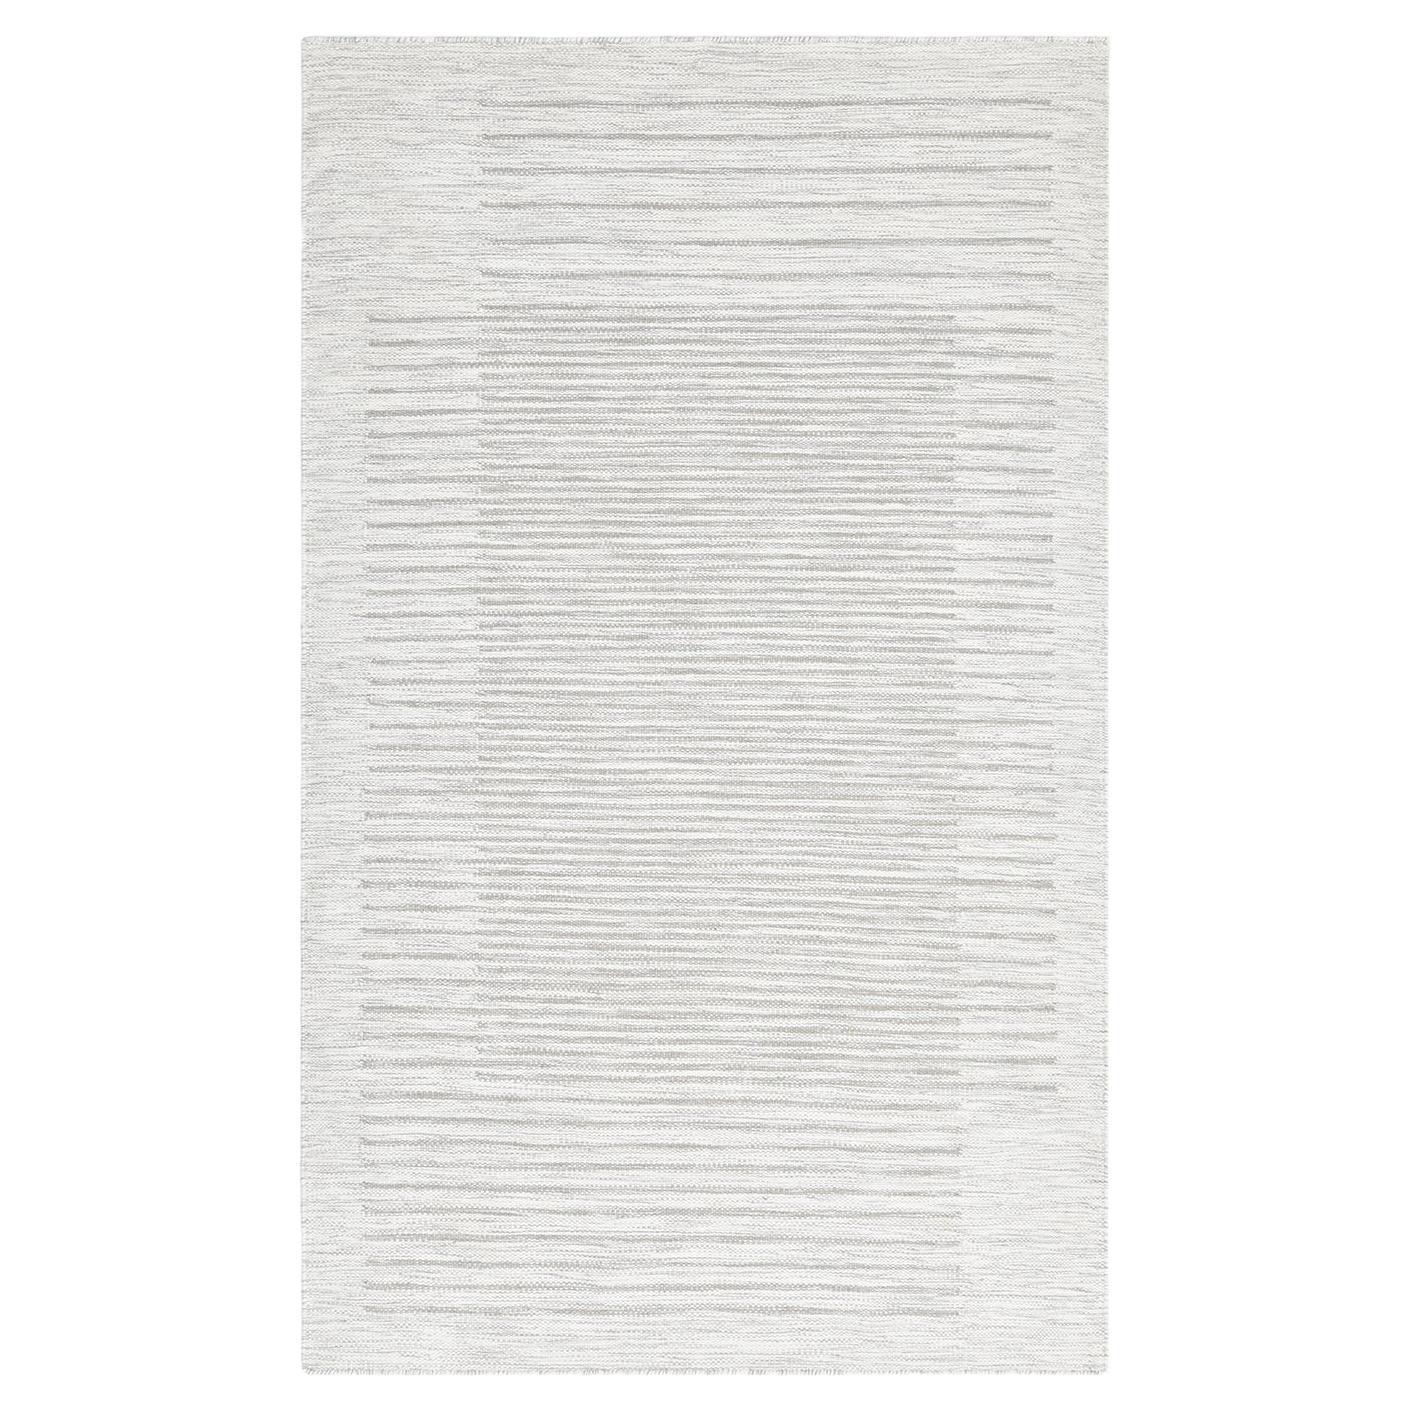 Solo Rugs George Contemporary Striped Handmade Area Rug Light Gray For Sale